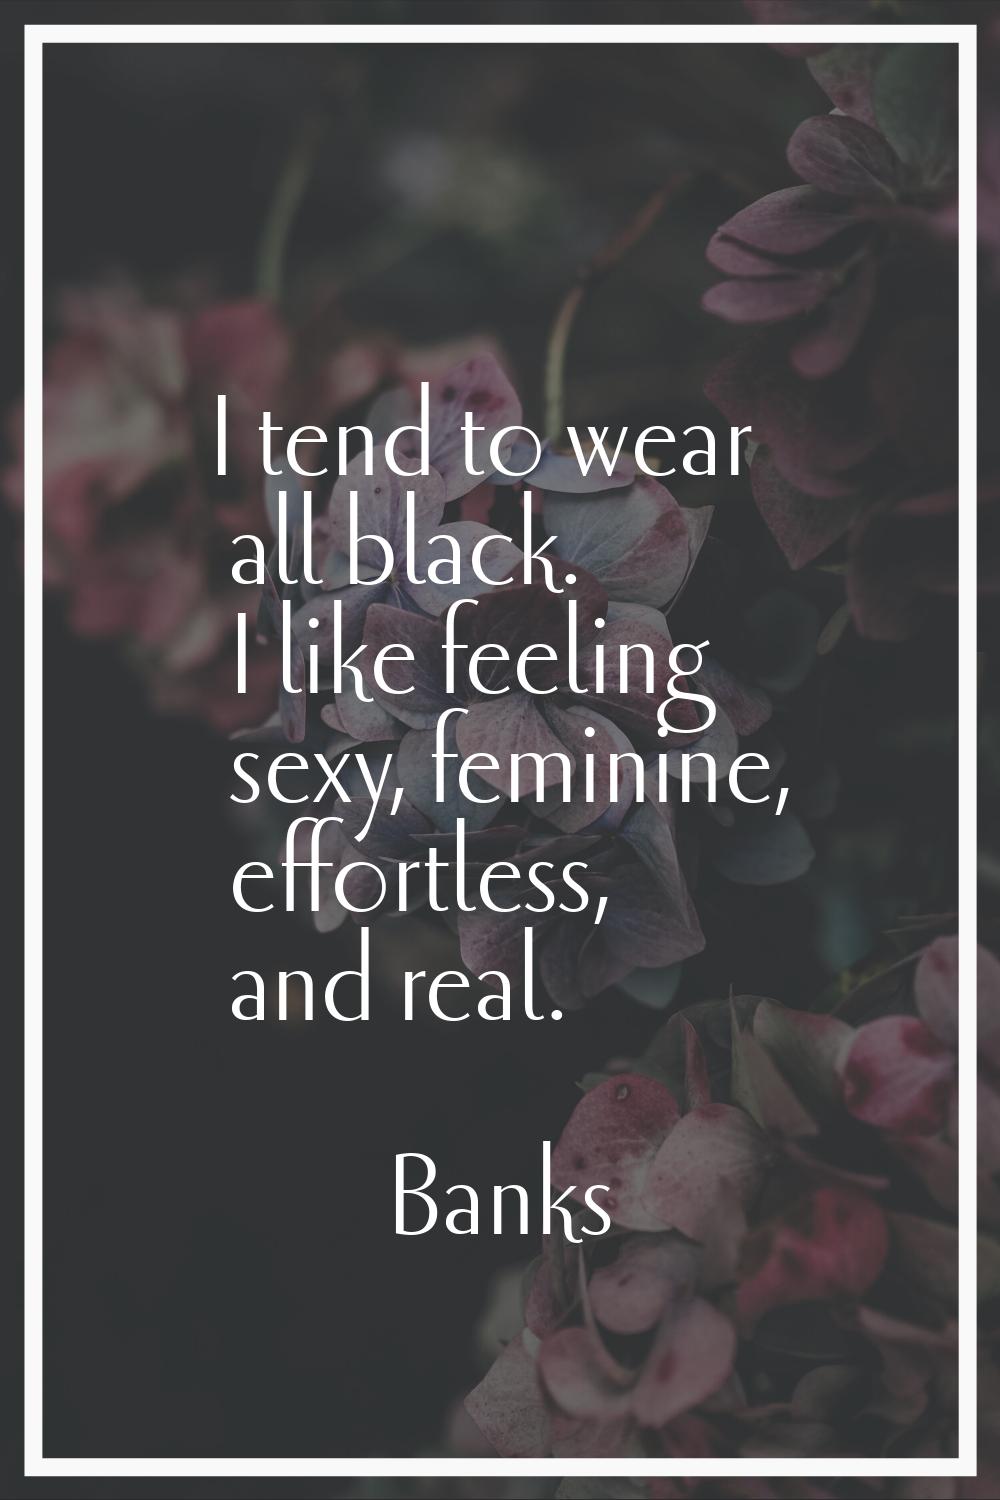 I tend to wear all black. I like feeling sexy, feminine, effortless, and real.